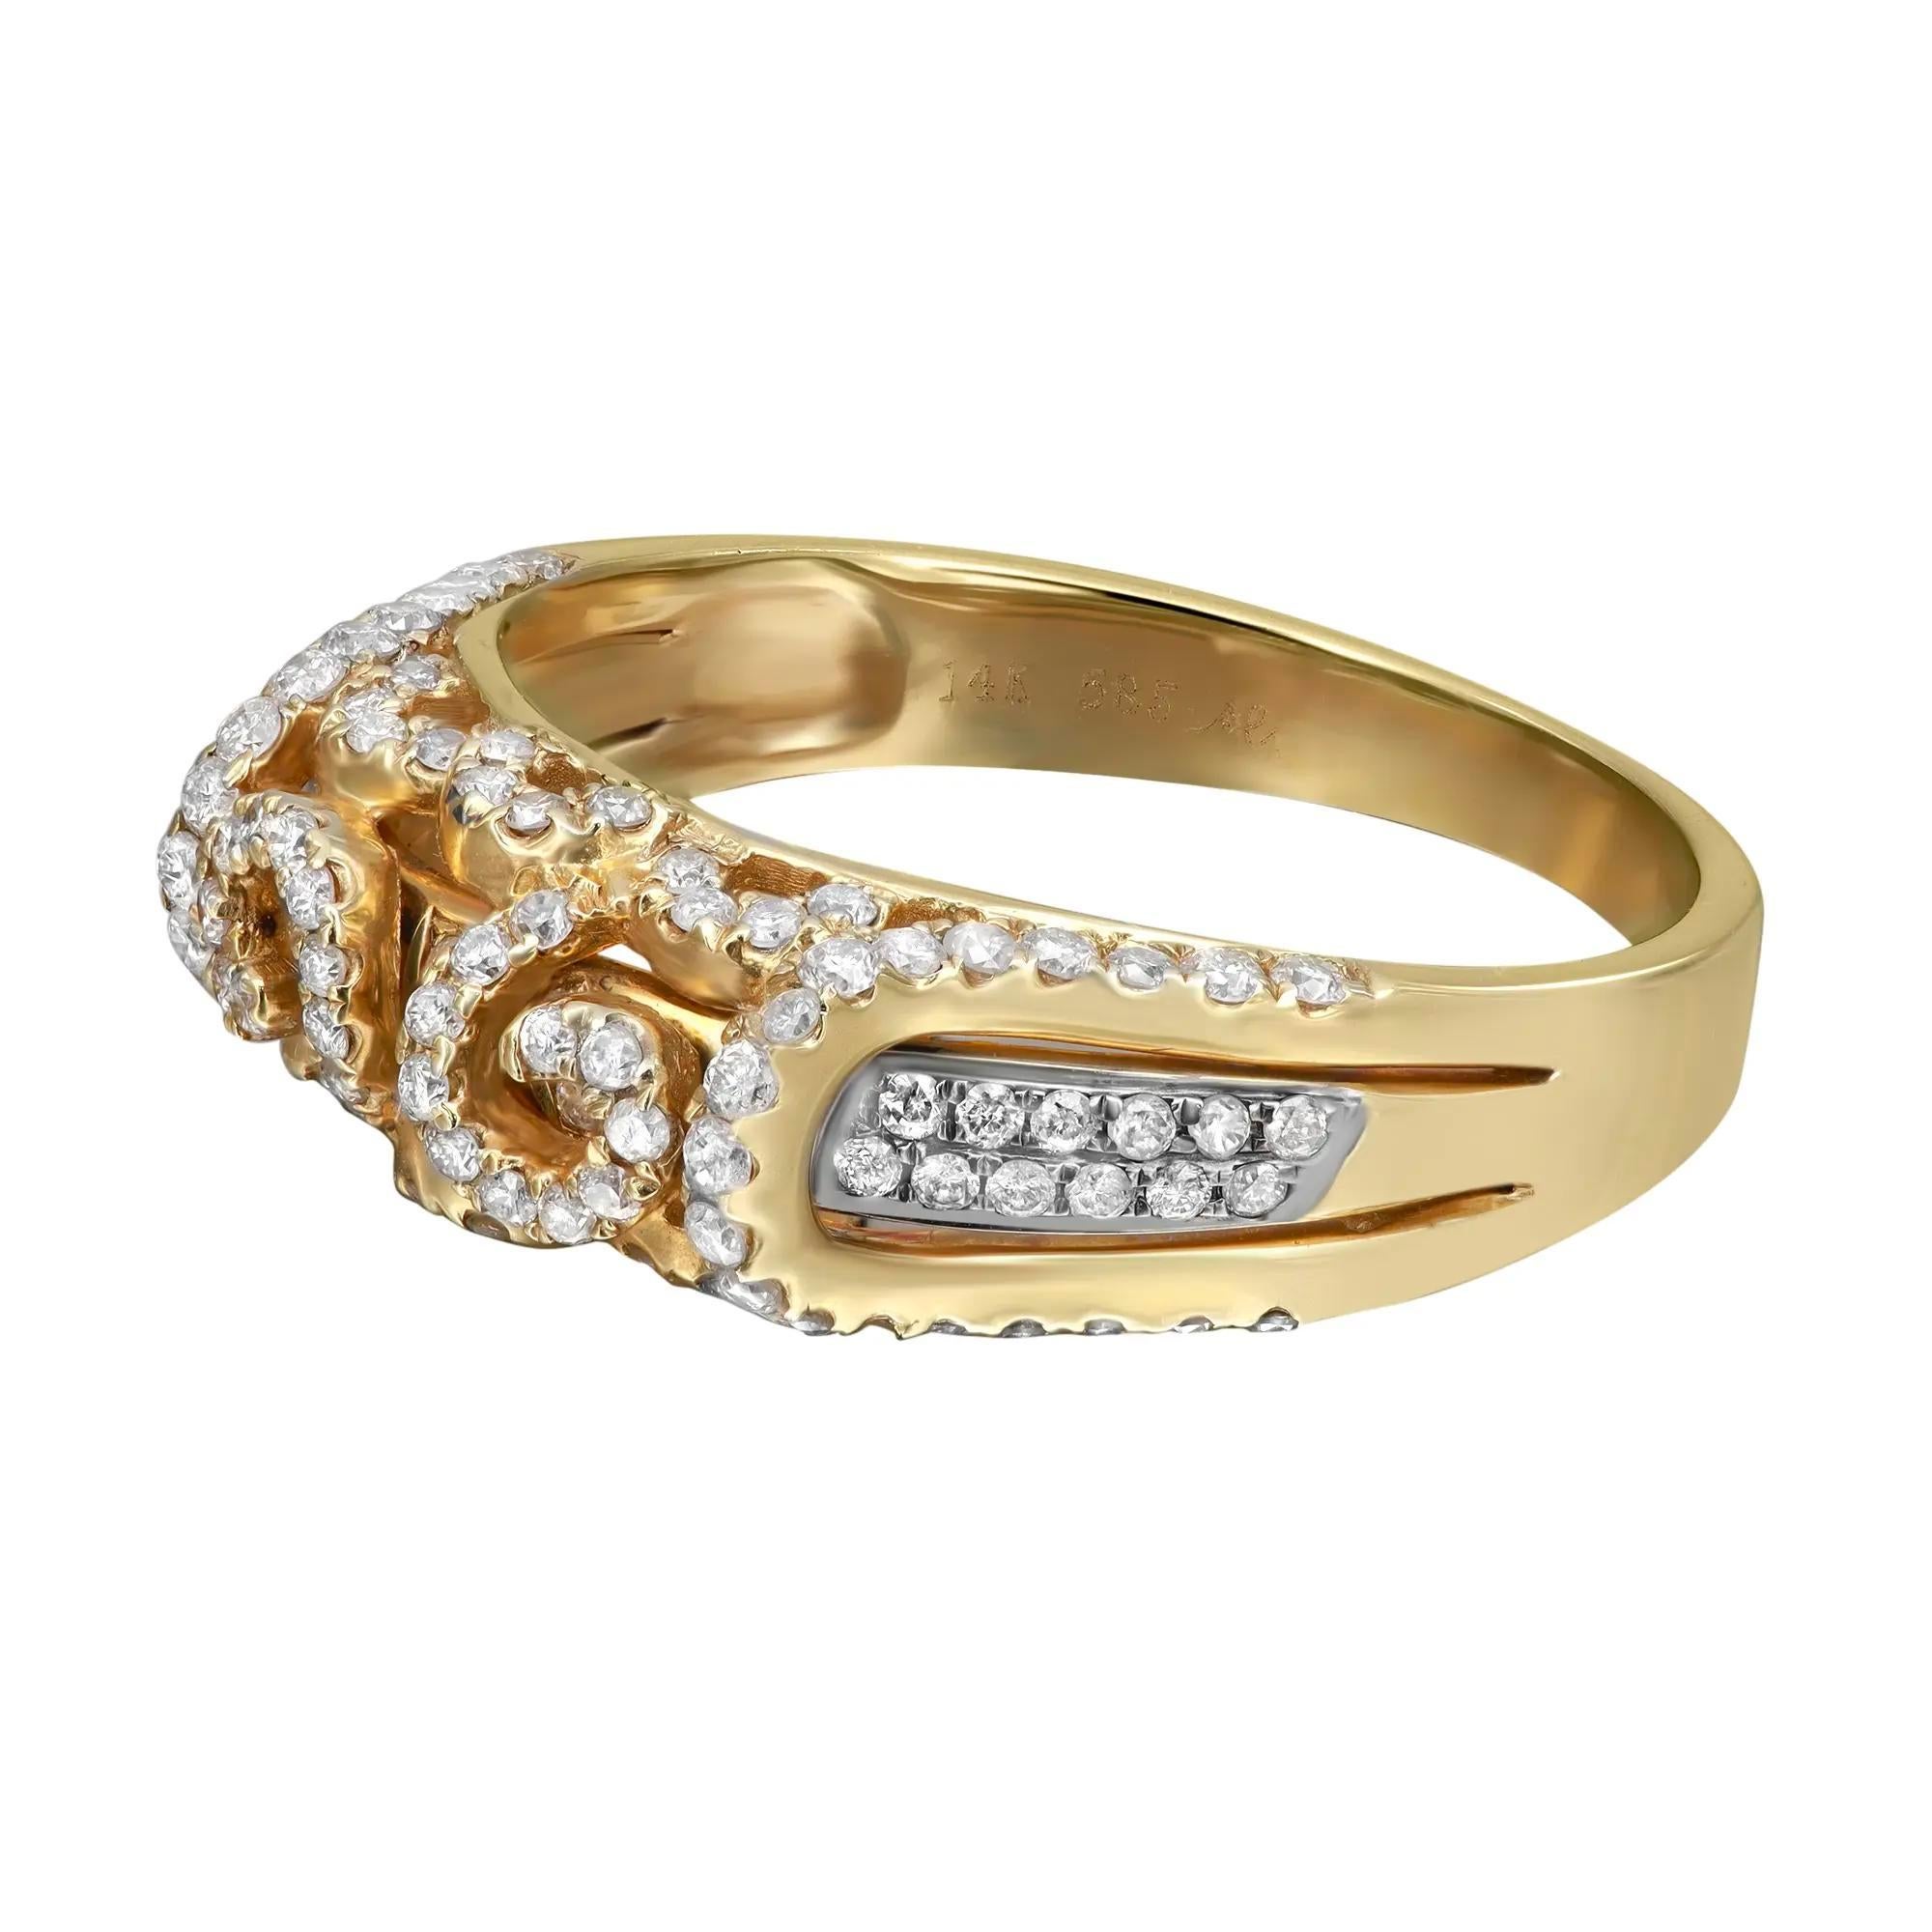 Sparkle with this fancy yellow gold diamond band ring. This ring provides a lustrous polished look with its round cut diamonds weighing 0.60 carat. Diamond color I and SI clarity. Metal: 14K yellow gold. Ring size: 7.5. The width of the ring is 6.8